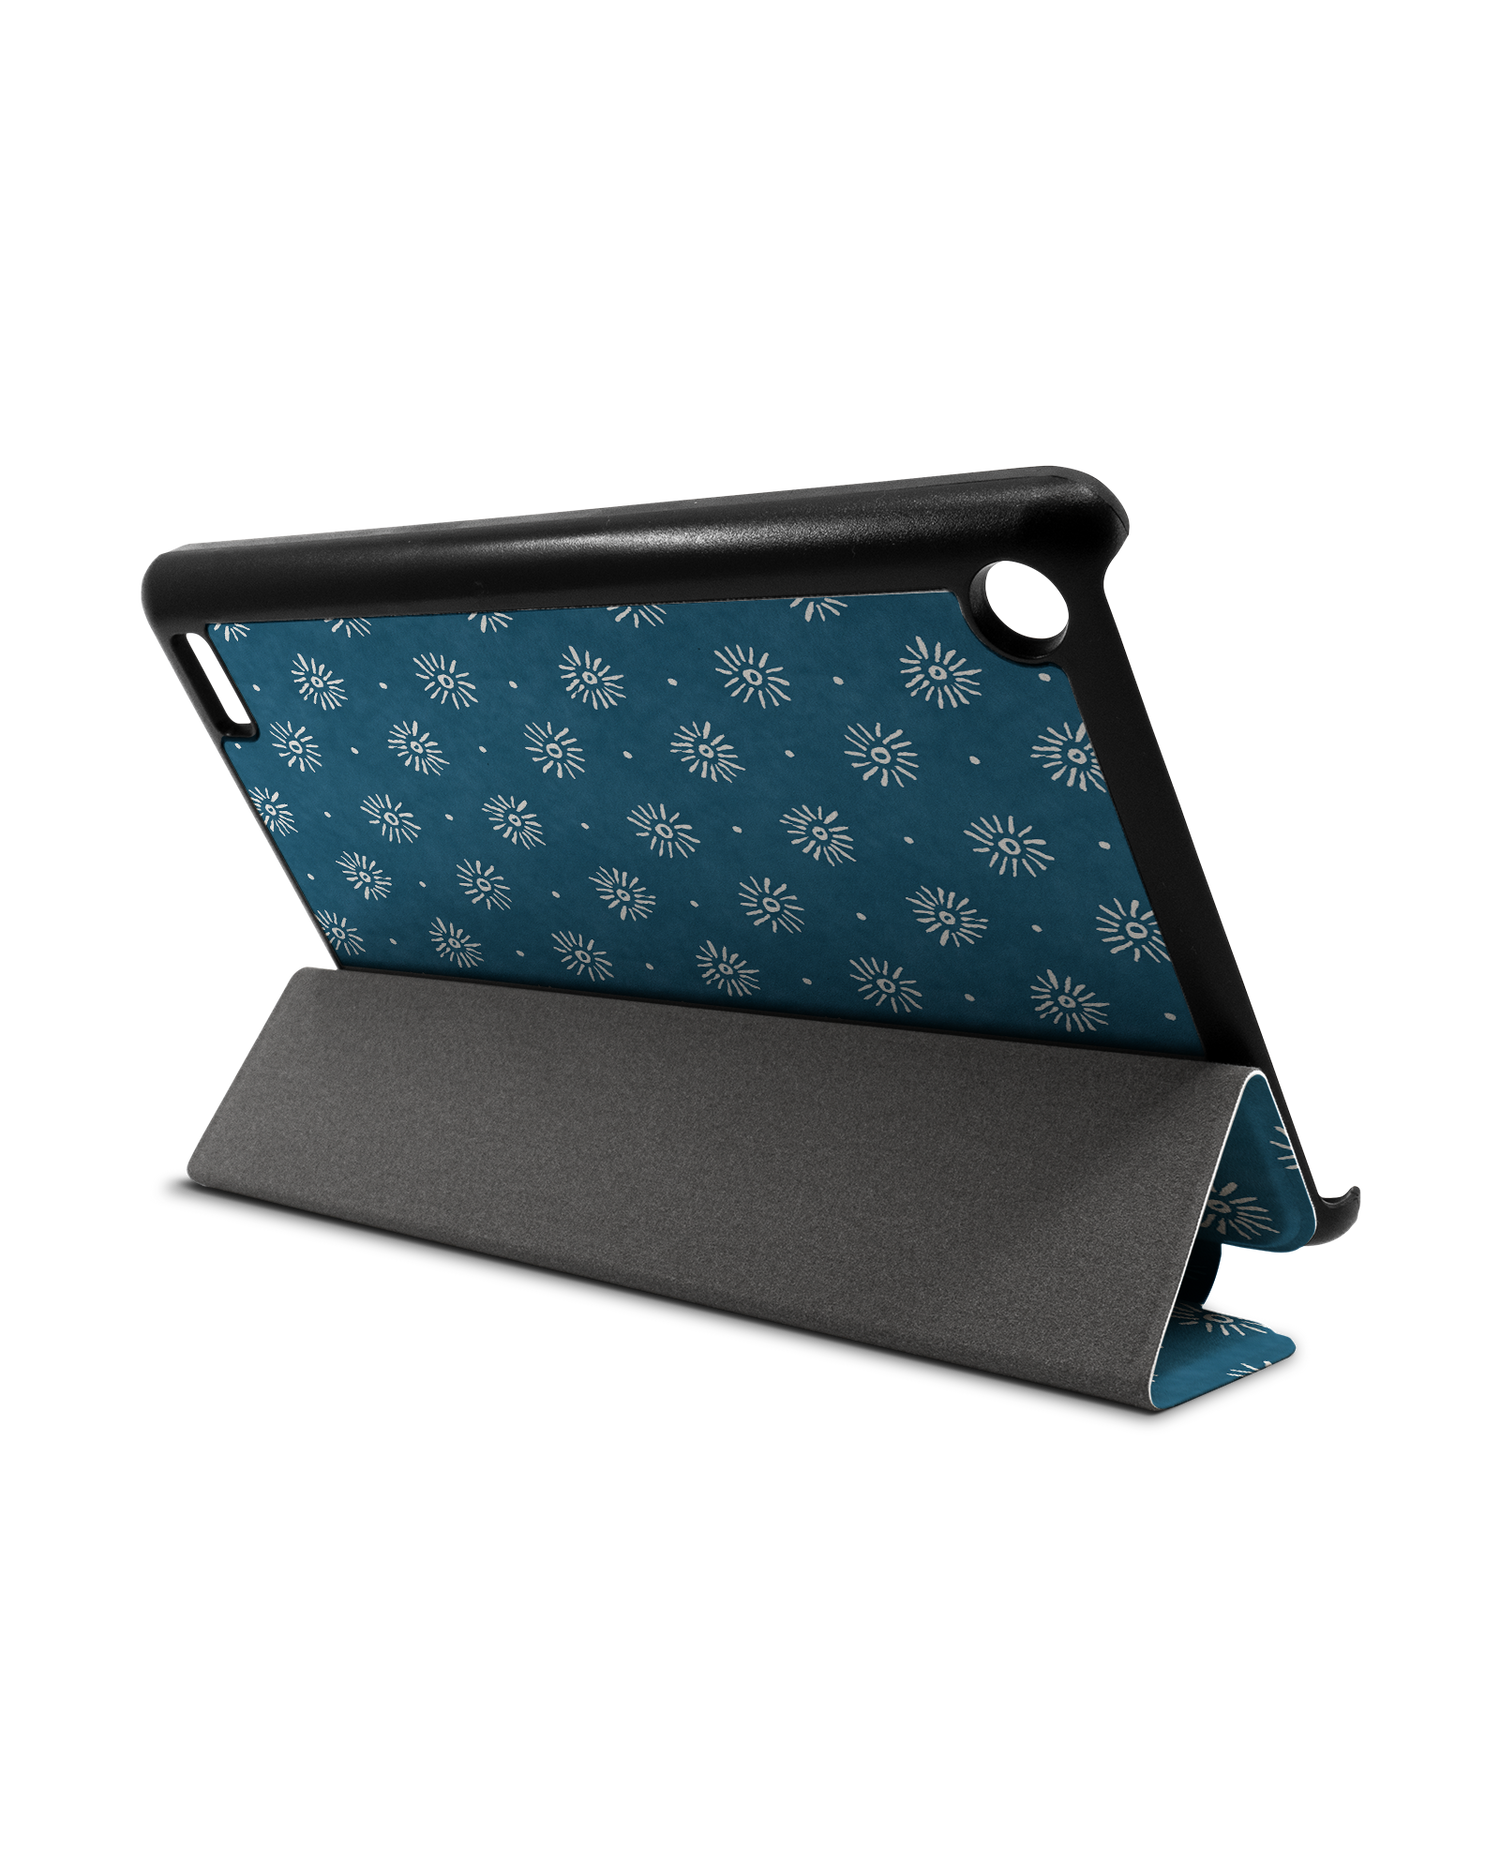 Indigo Sun Pattern Tablet Smart Case for Amazon Fire 7: Used as Stand